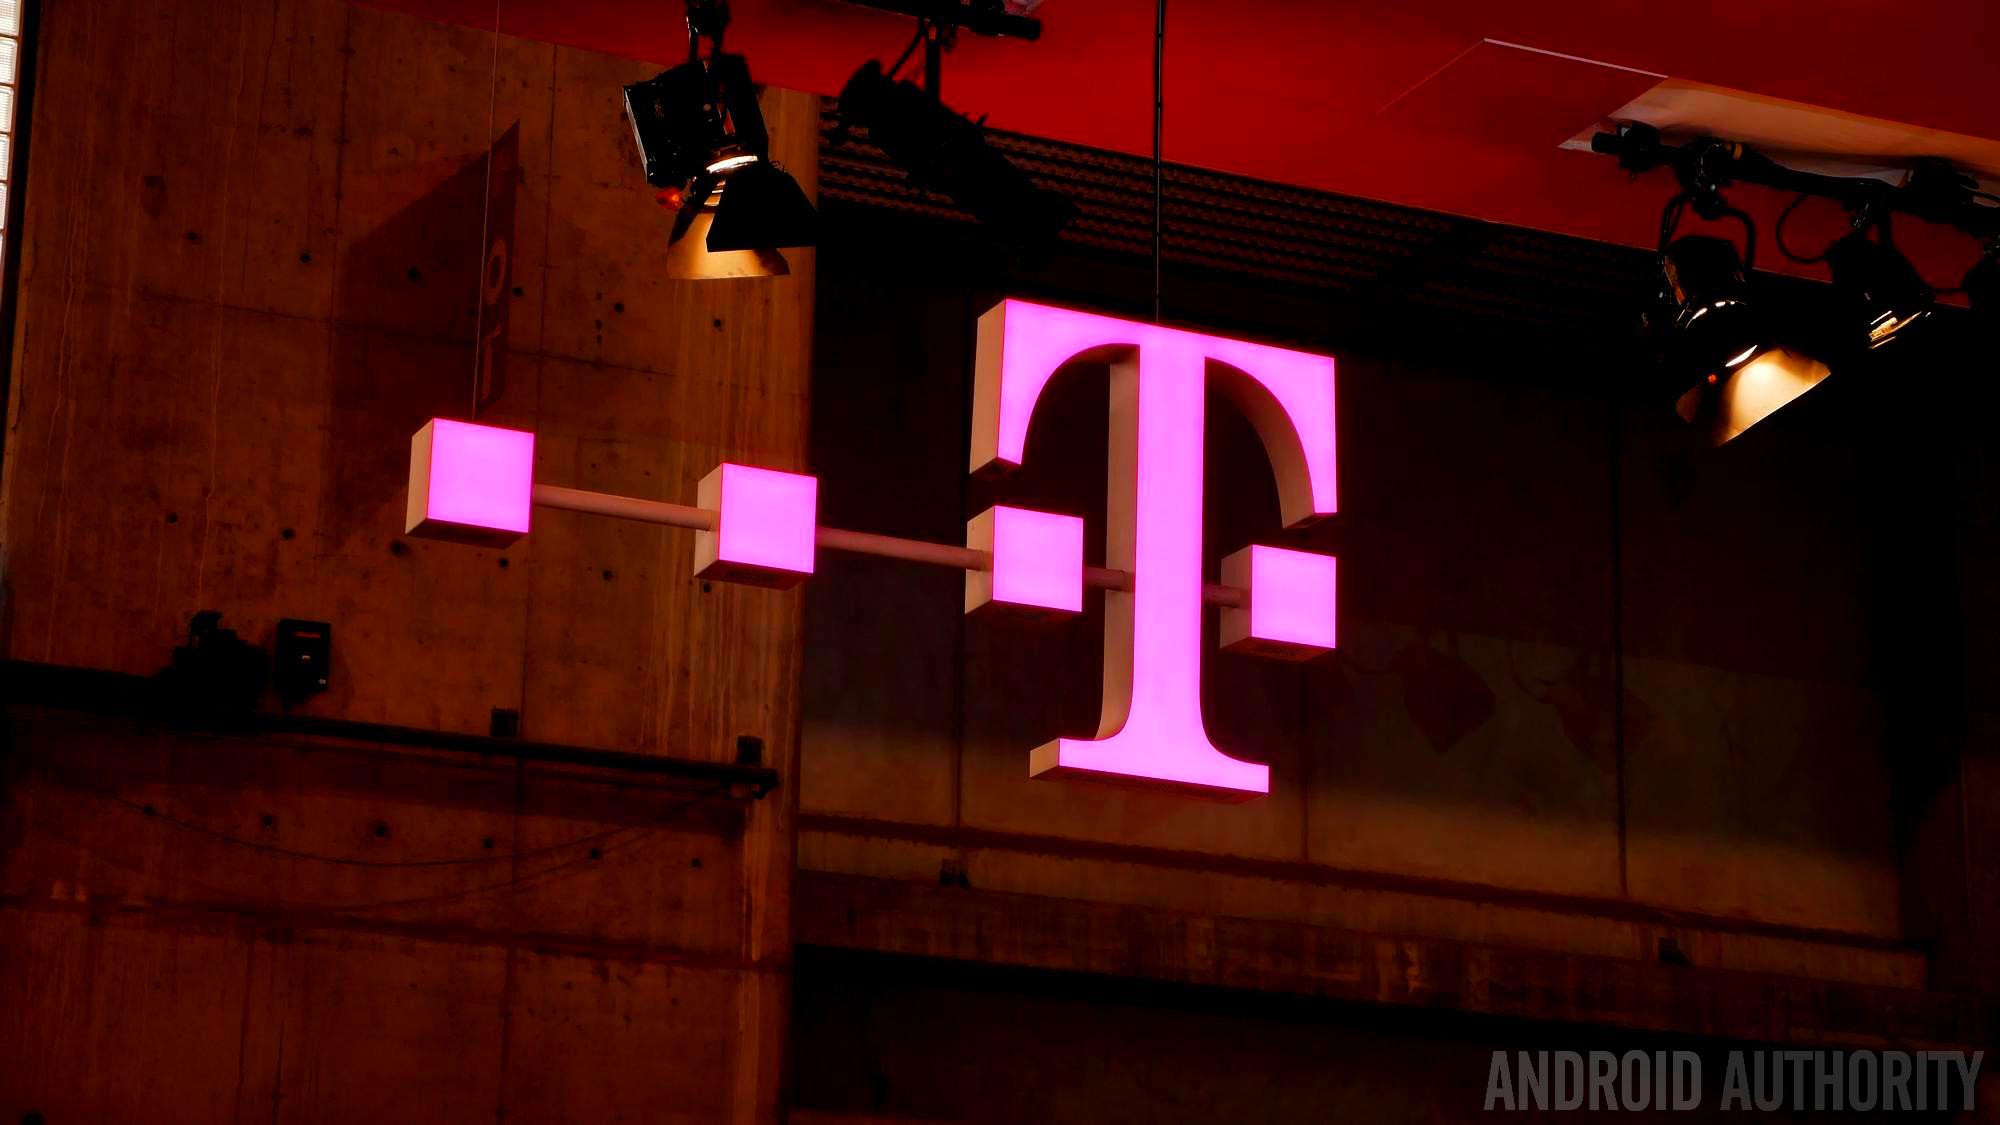 t-mobile logo mwc 2015